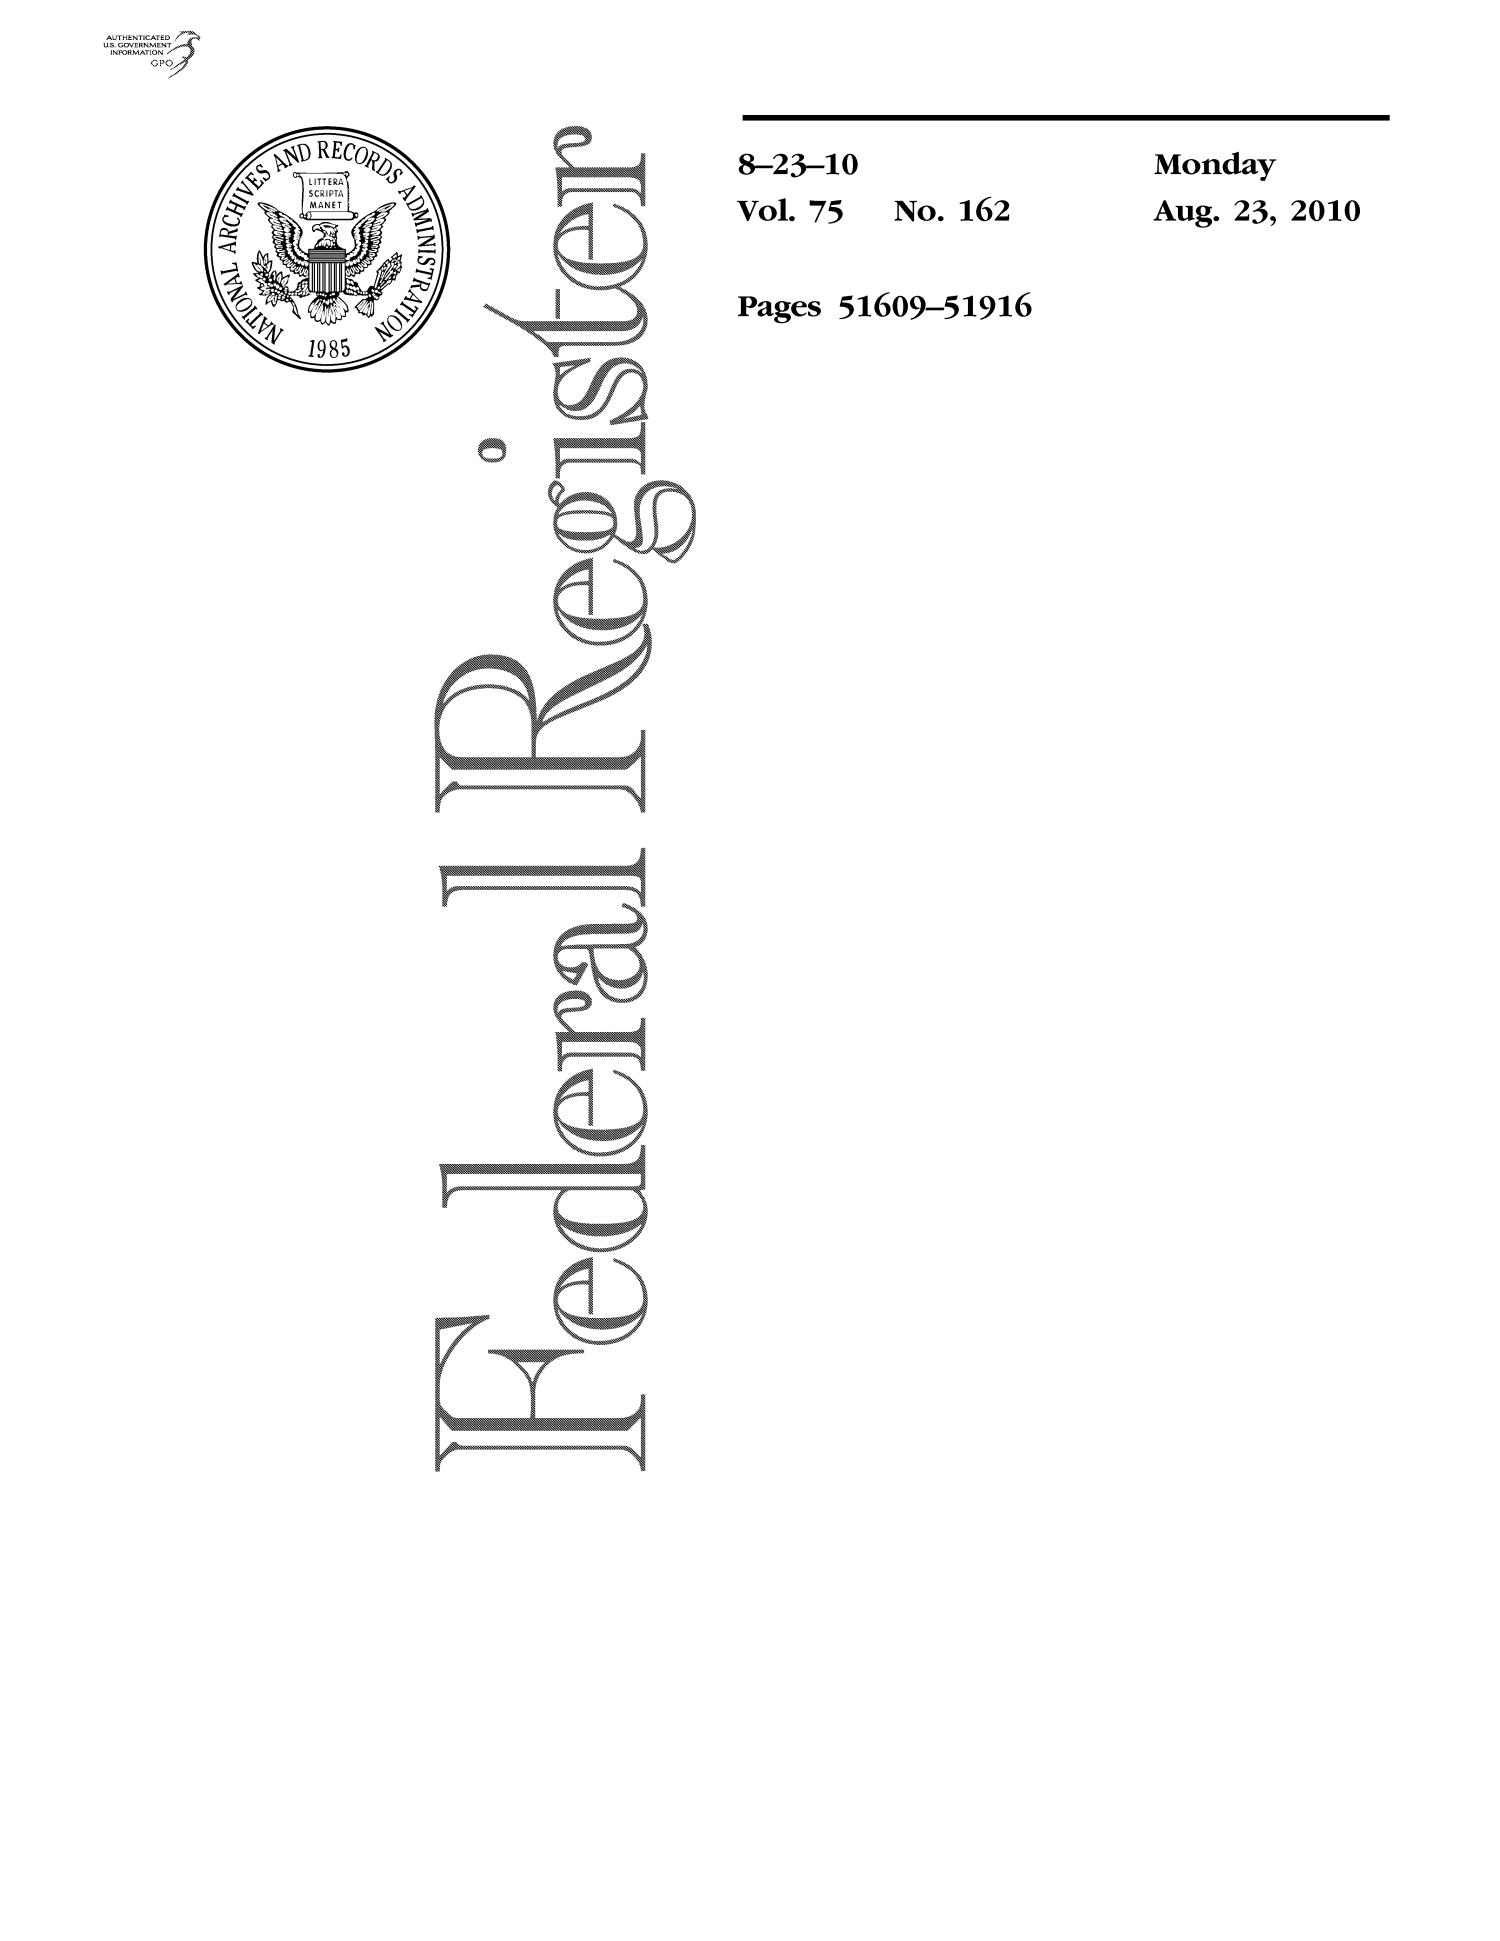 Federal Register, Volume 75, Number 162, August 23, 2010, Pages 51609-51916
                                                
                                                    Title Page
                                                